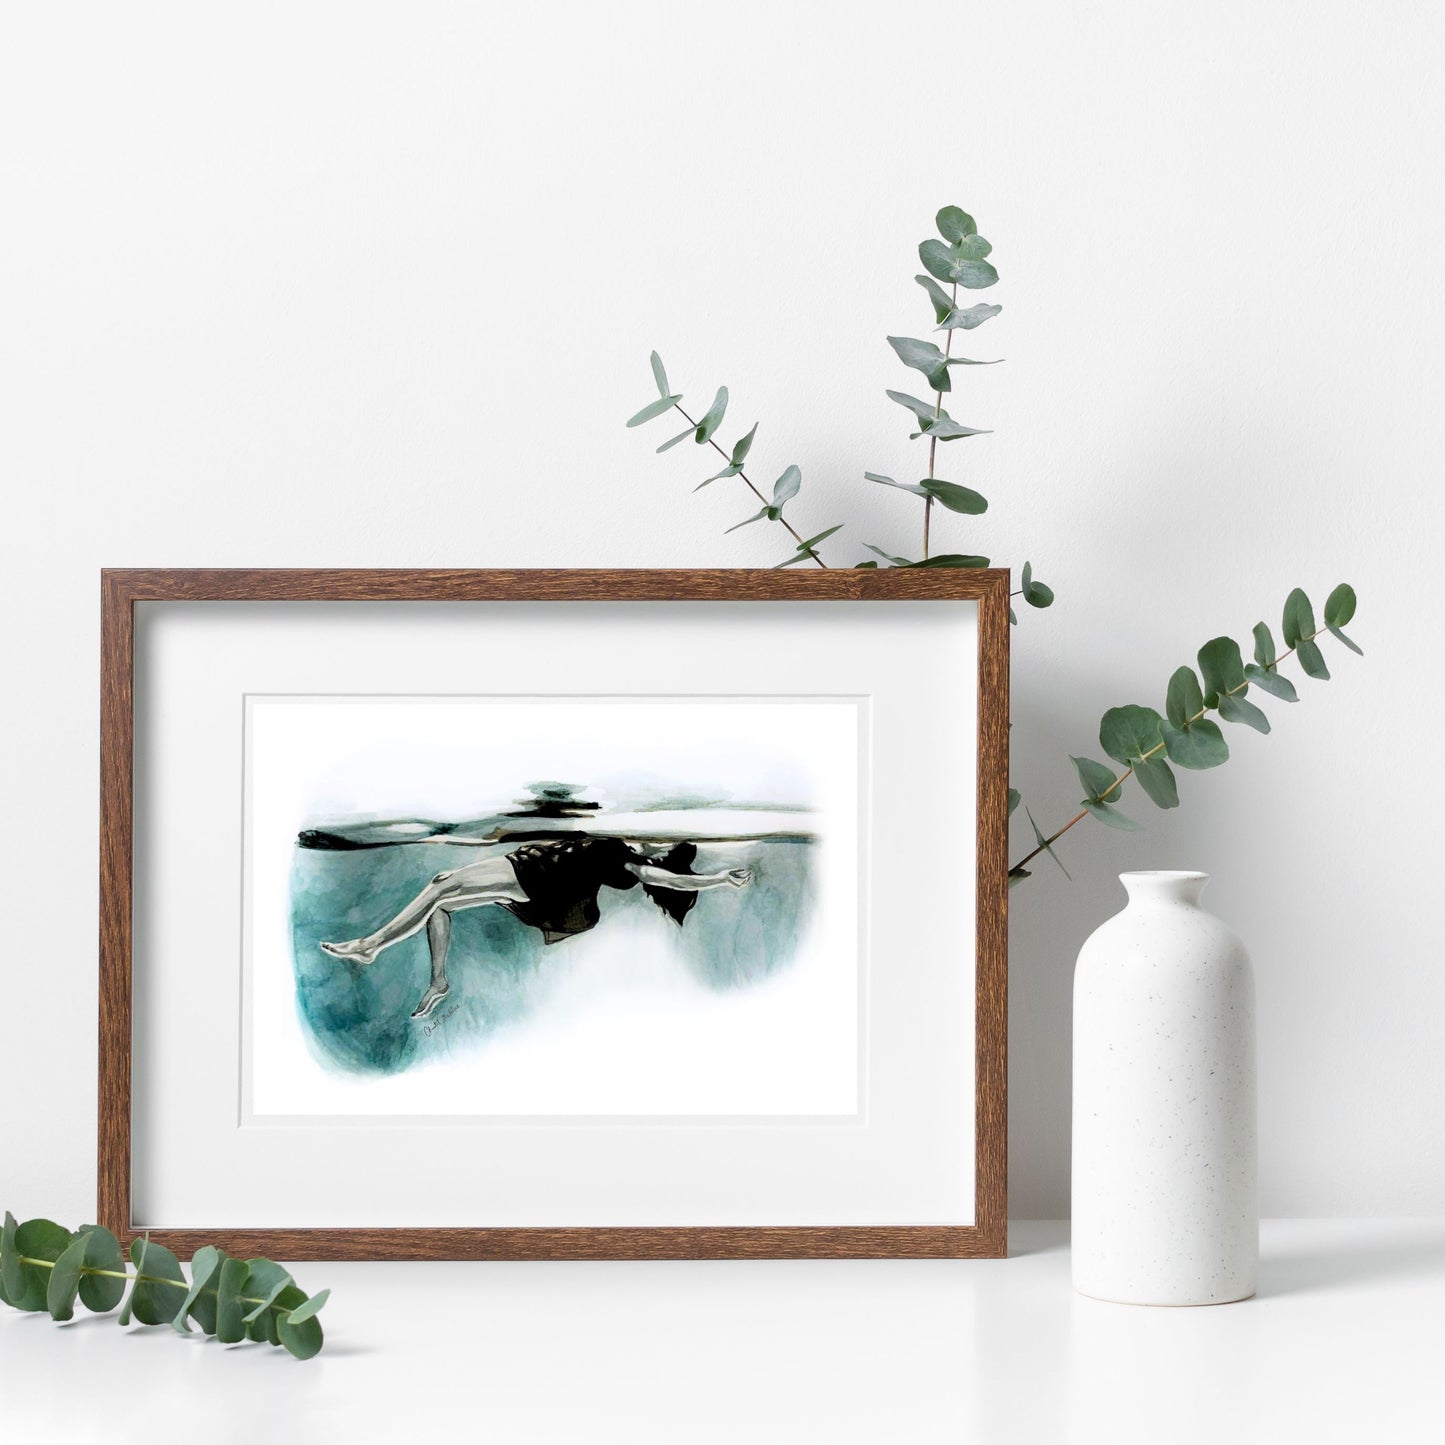 Floating, Woman floating art print, Grief series art, Giclee print on fine art paper